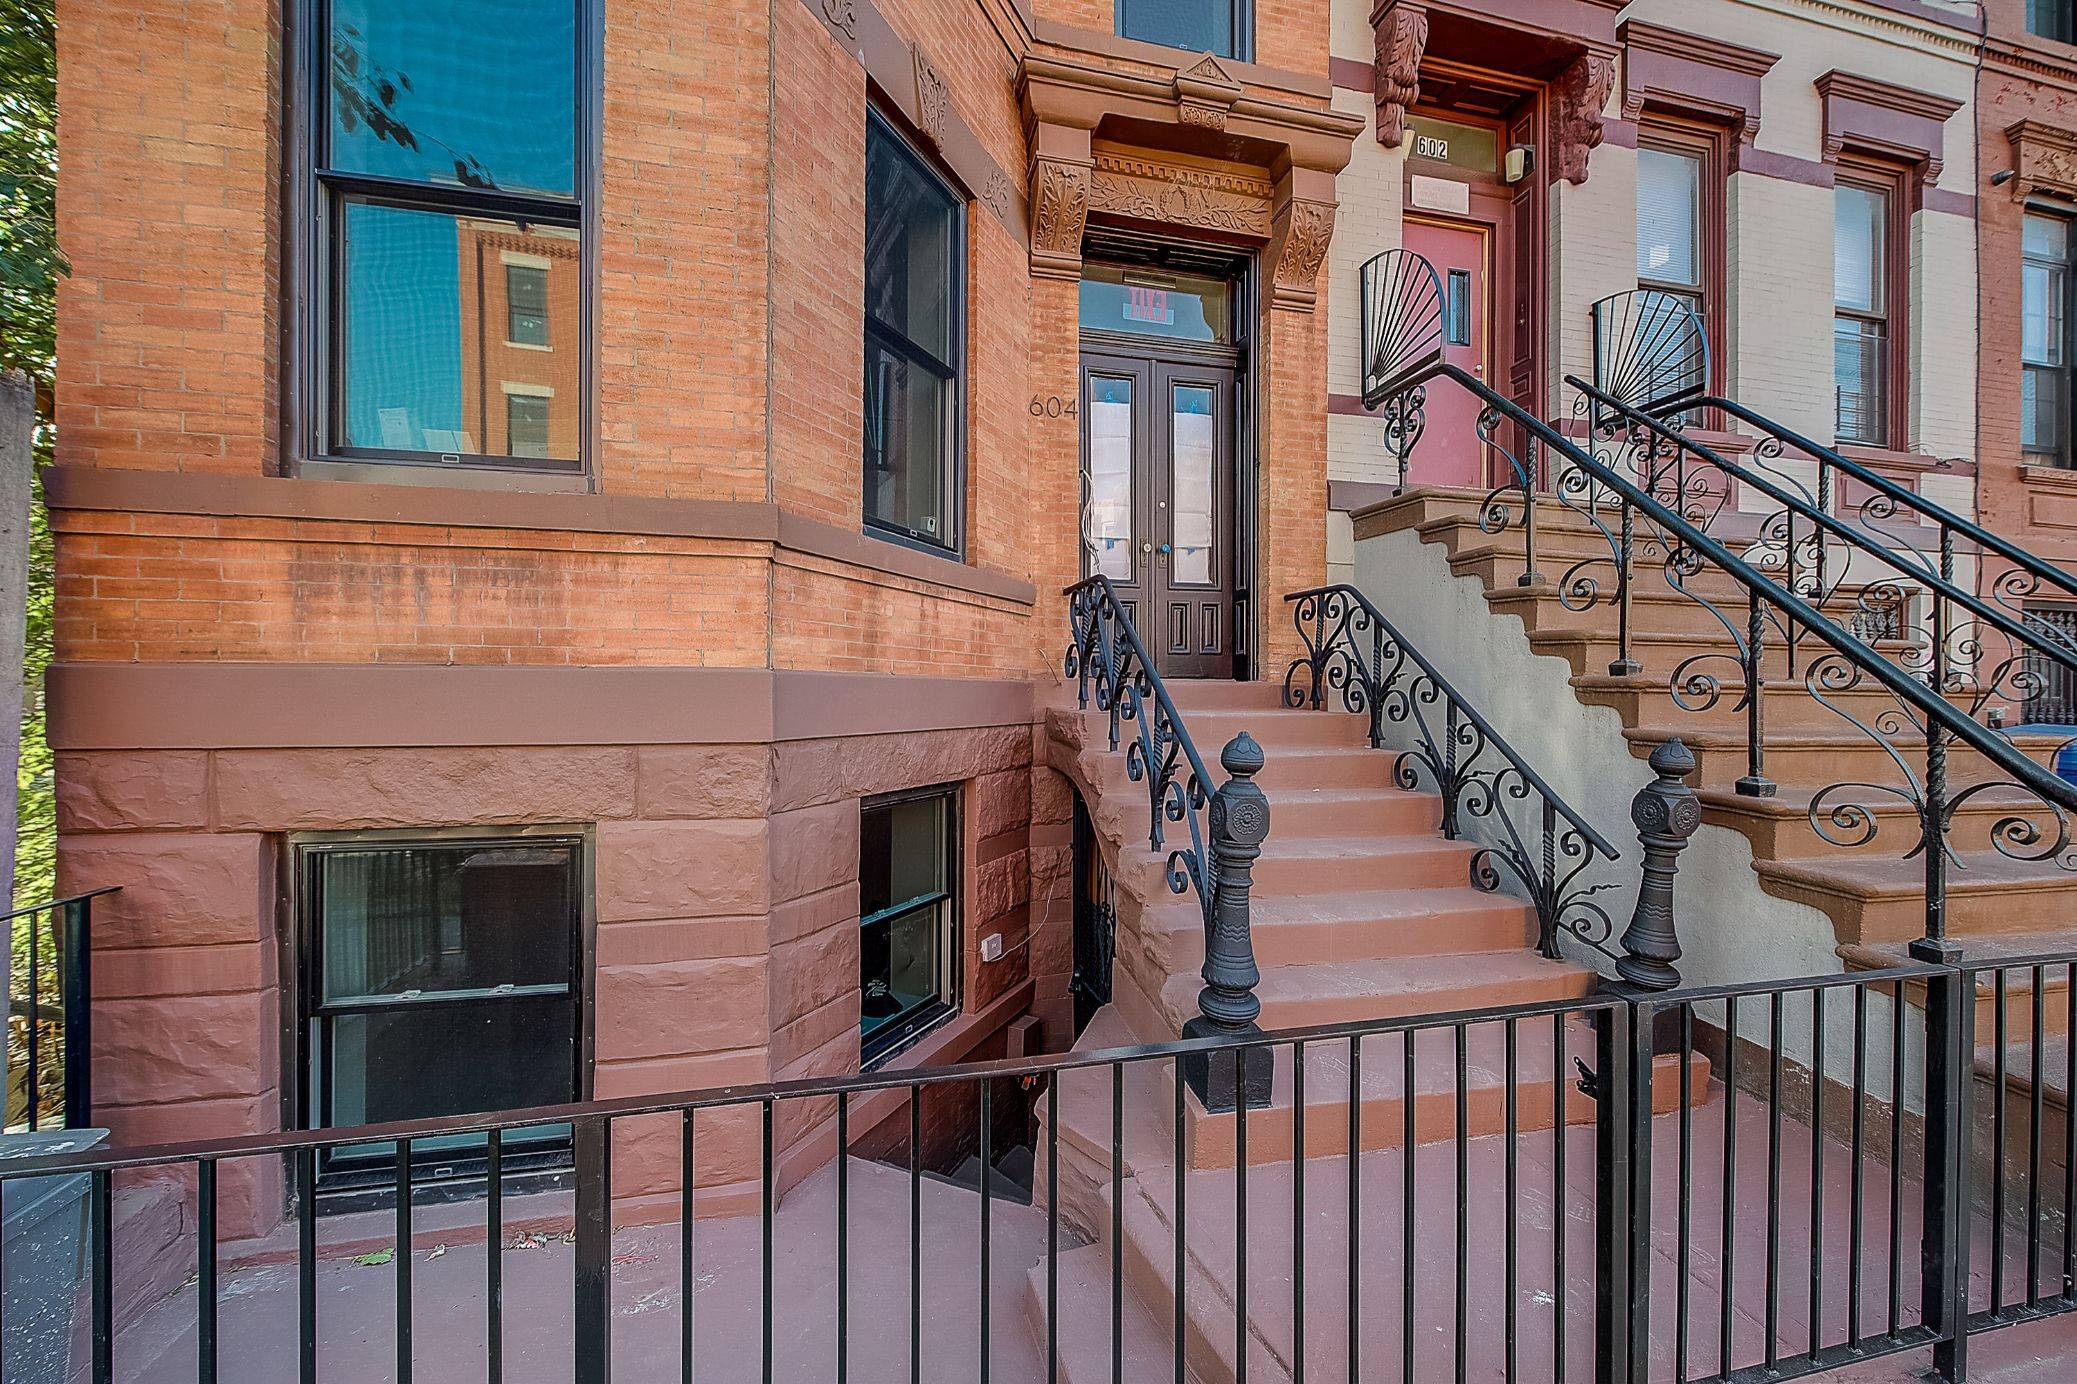 This 3 bedroom duplex condo with two and a half baths in handsome red brick townhouse has a spacious open layout kitchen with a living room dining room combo.